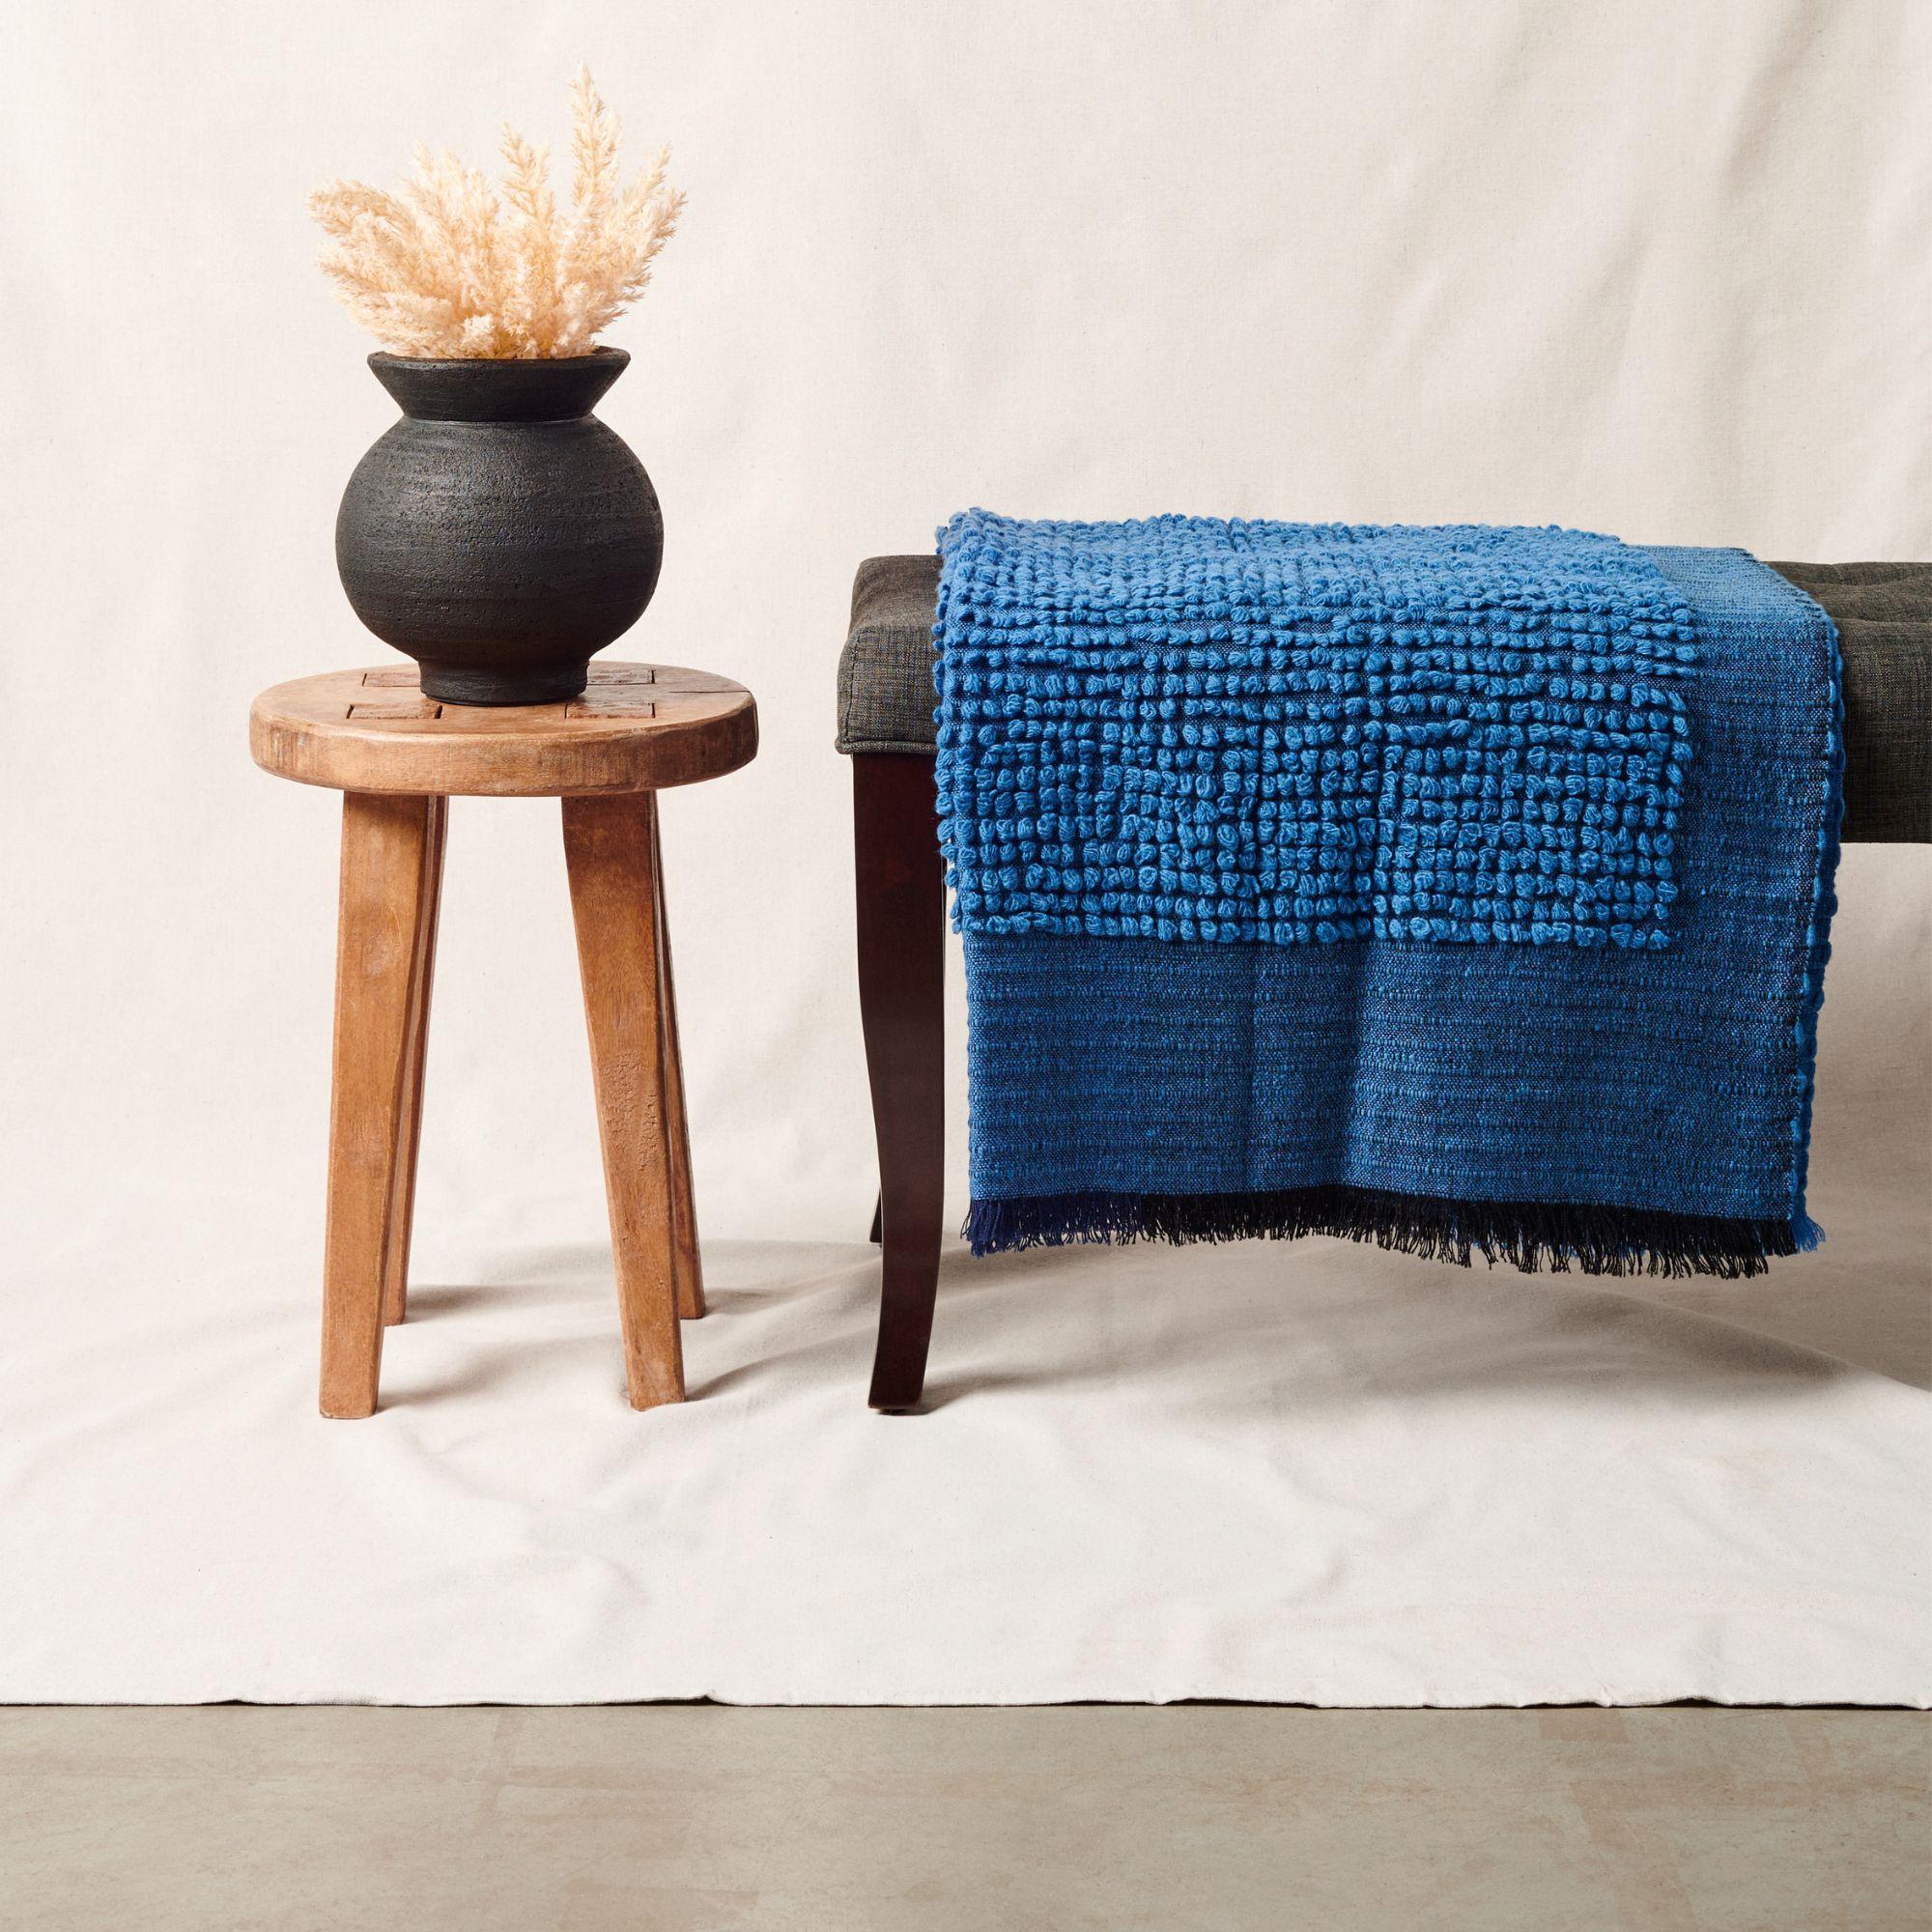 Custom design by Studio Variously, Macaroon midnight throw or blanket is a plush handloom textile ethically woven by master weavers in Nepal and dyed entirely with earth friendly dyes in soft 100% merino yarn.

A sustainable design brand based out